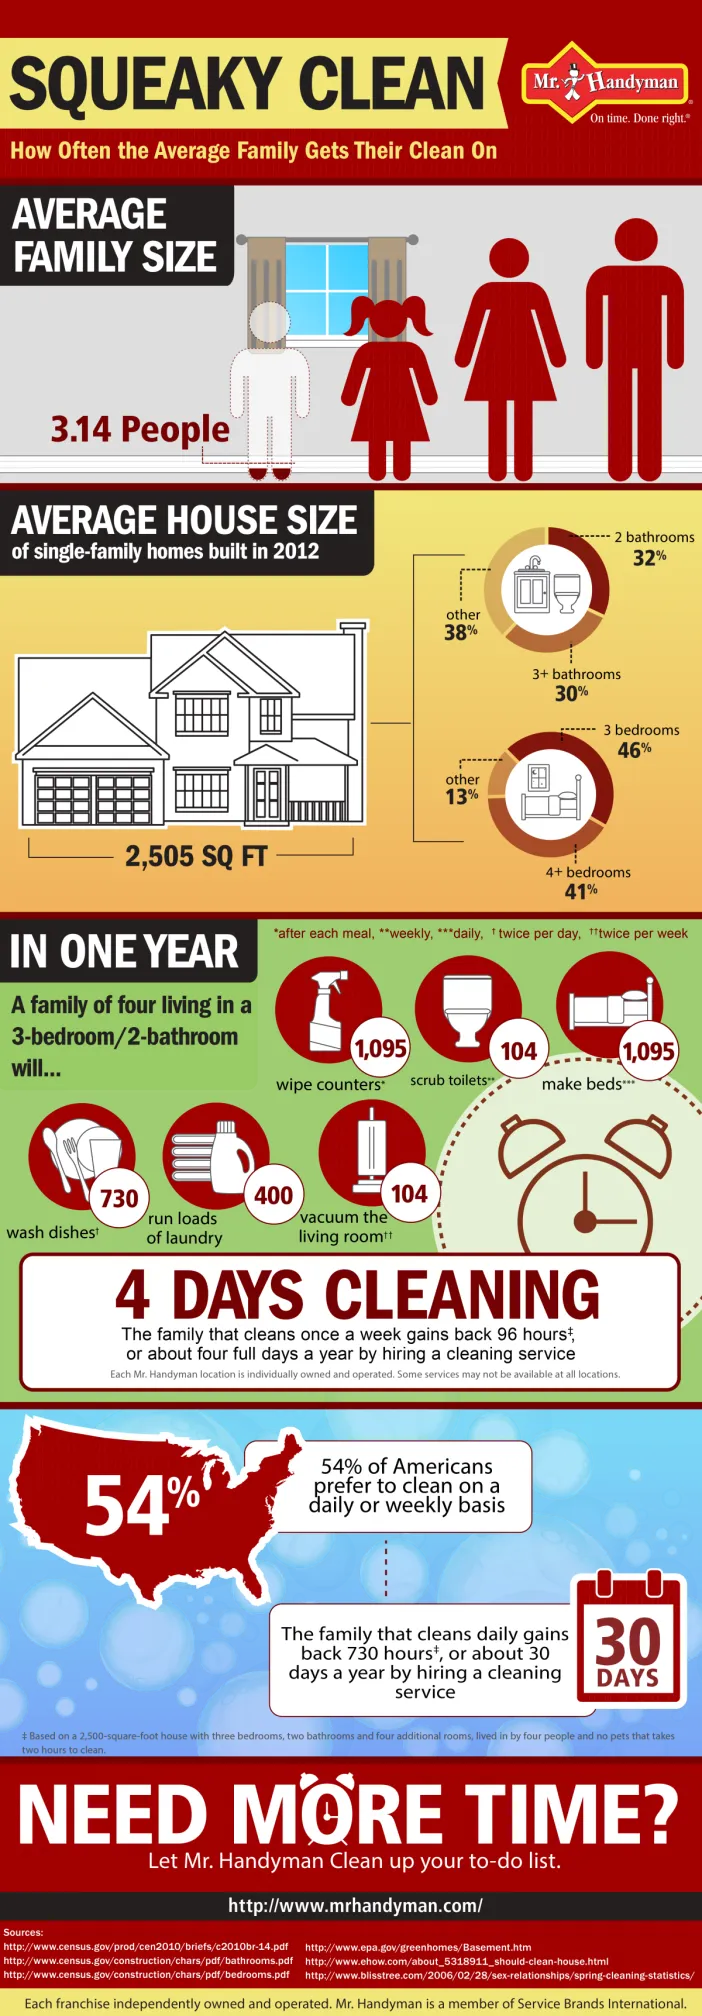 how often the average family gets their clean on infographic